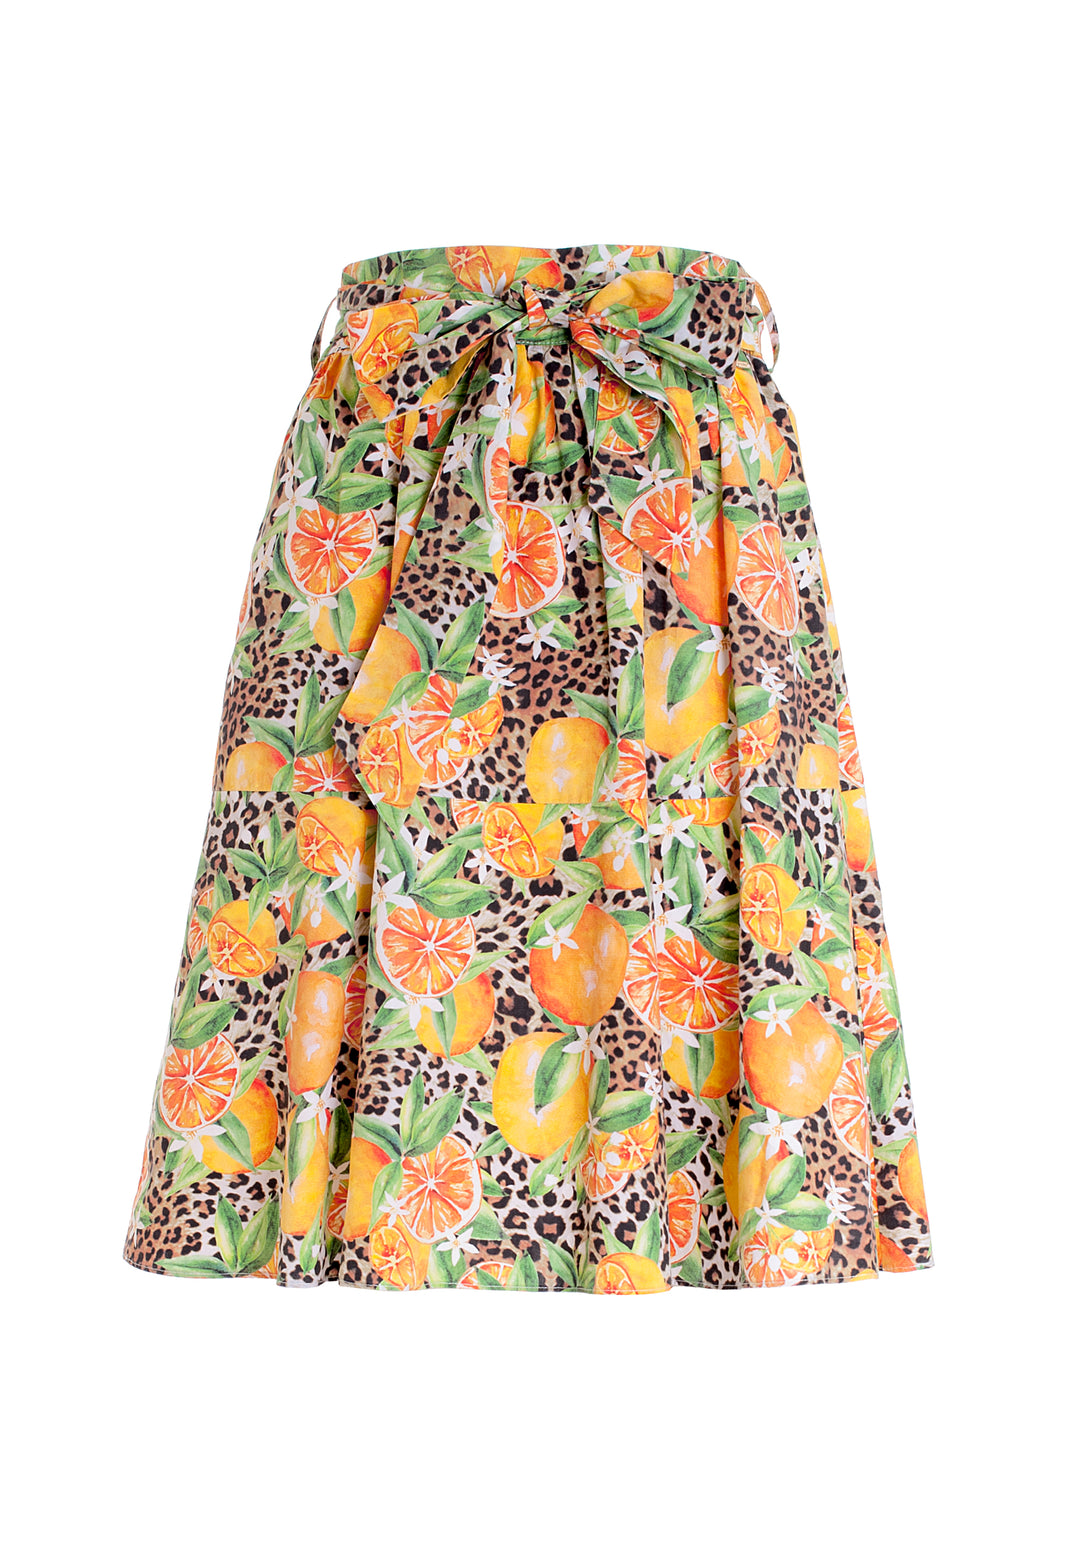 Skirt wide fit made in cotton with tropical pattern